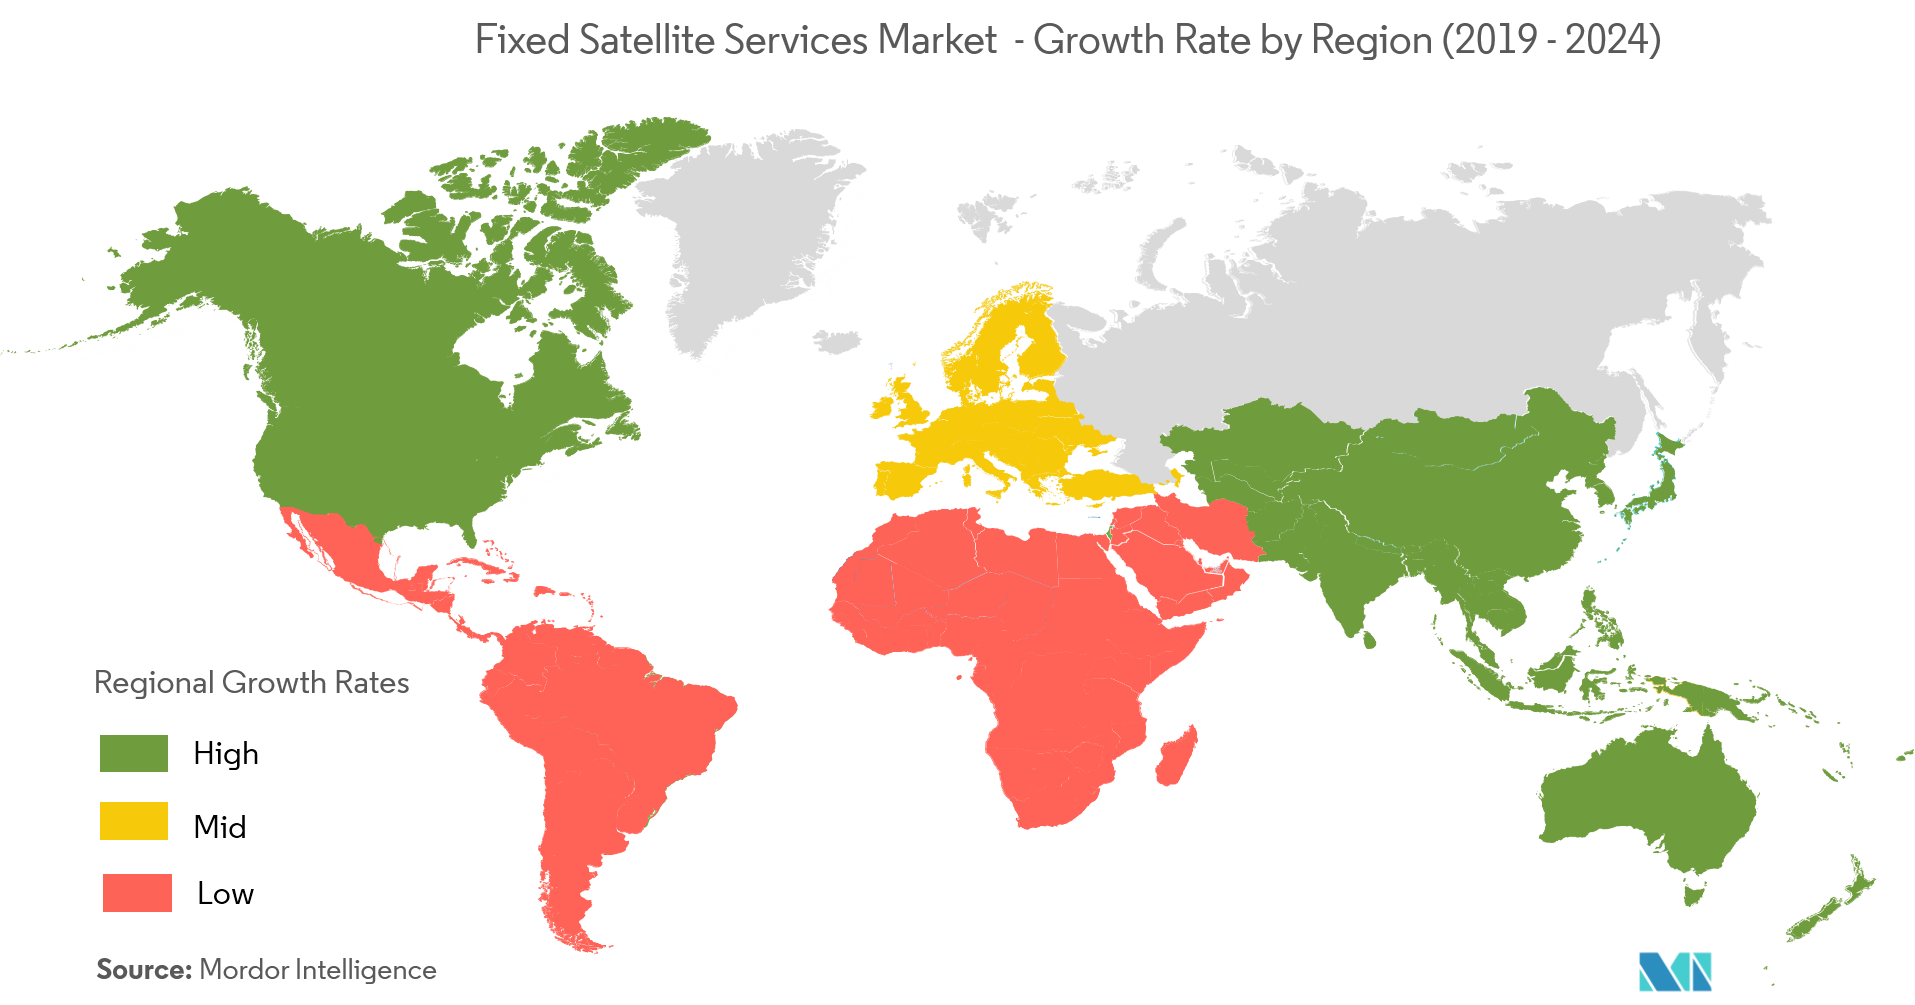 Fixed Satellite Services Market - Growth Rate By Region (2019 - 2024)